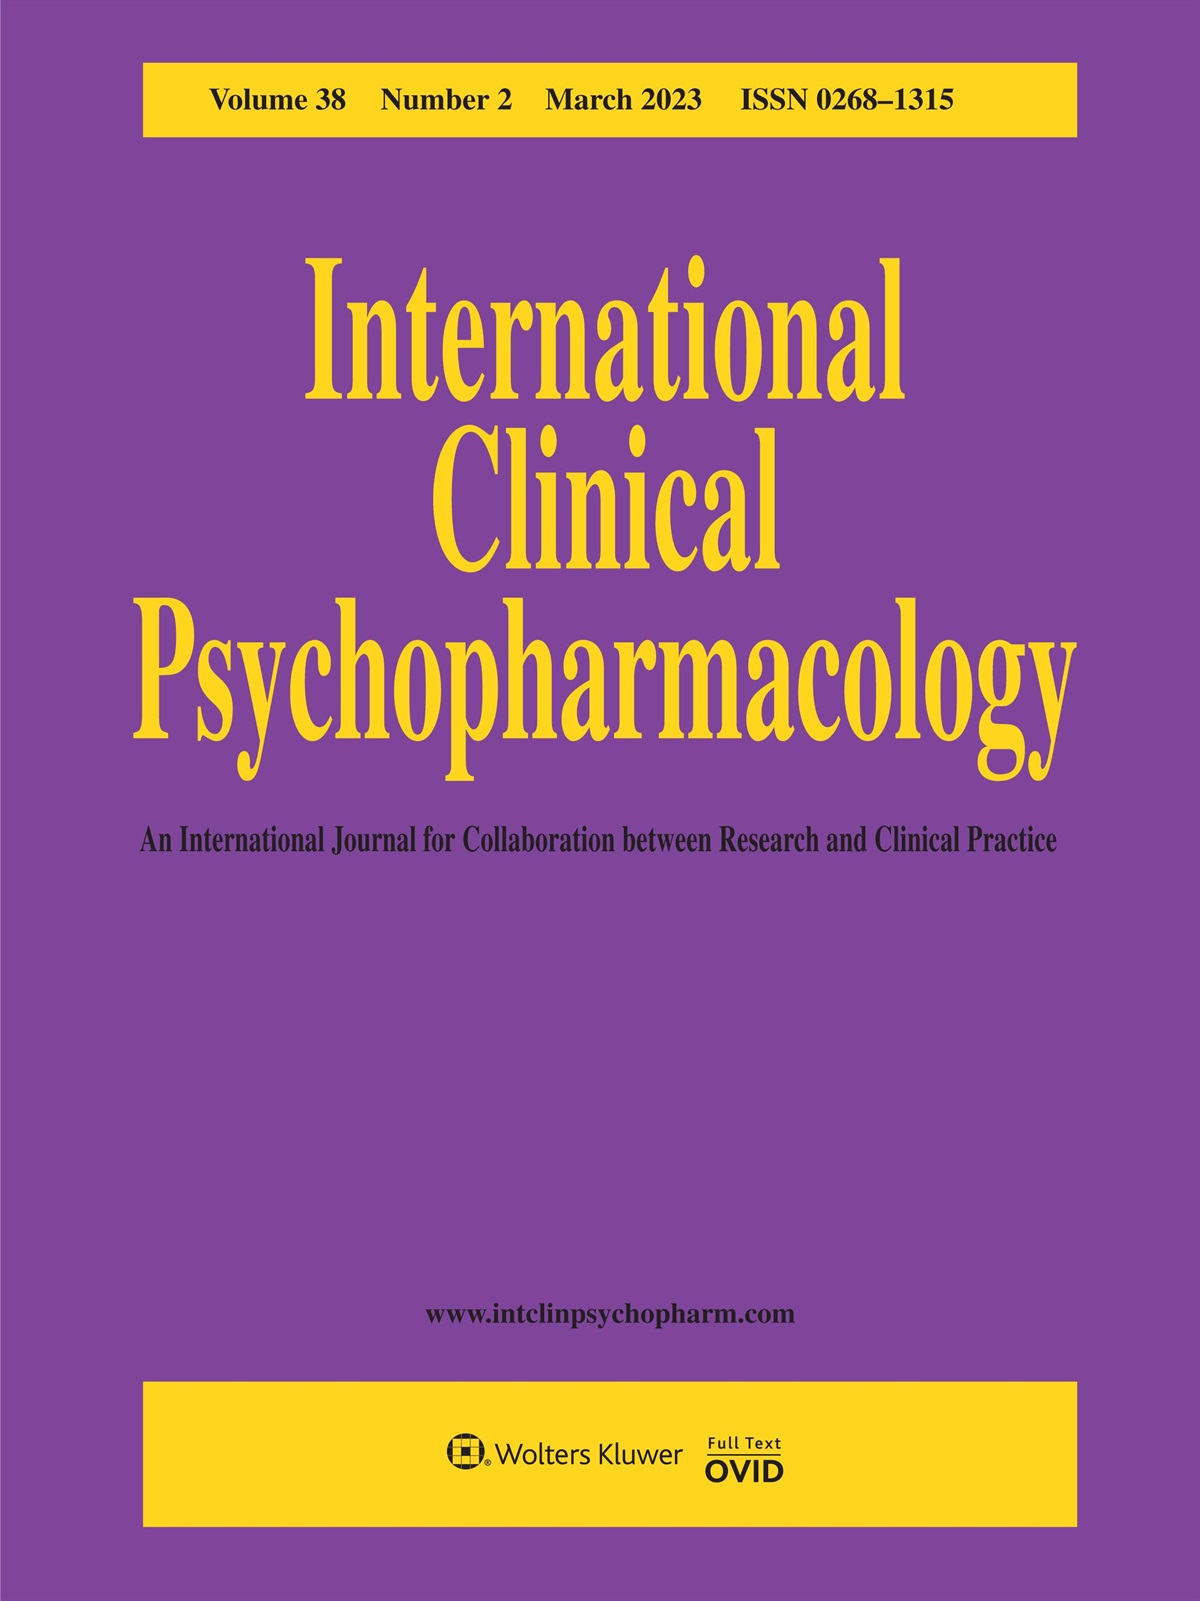 The challenge of managing difficult to treat psychiatric conditions